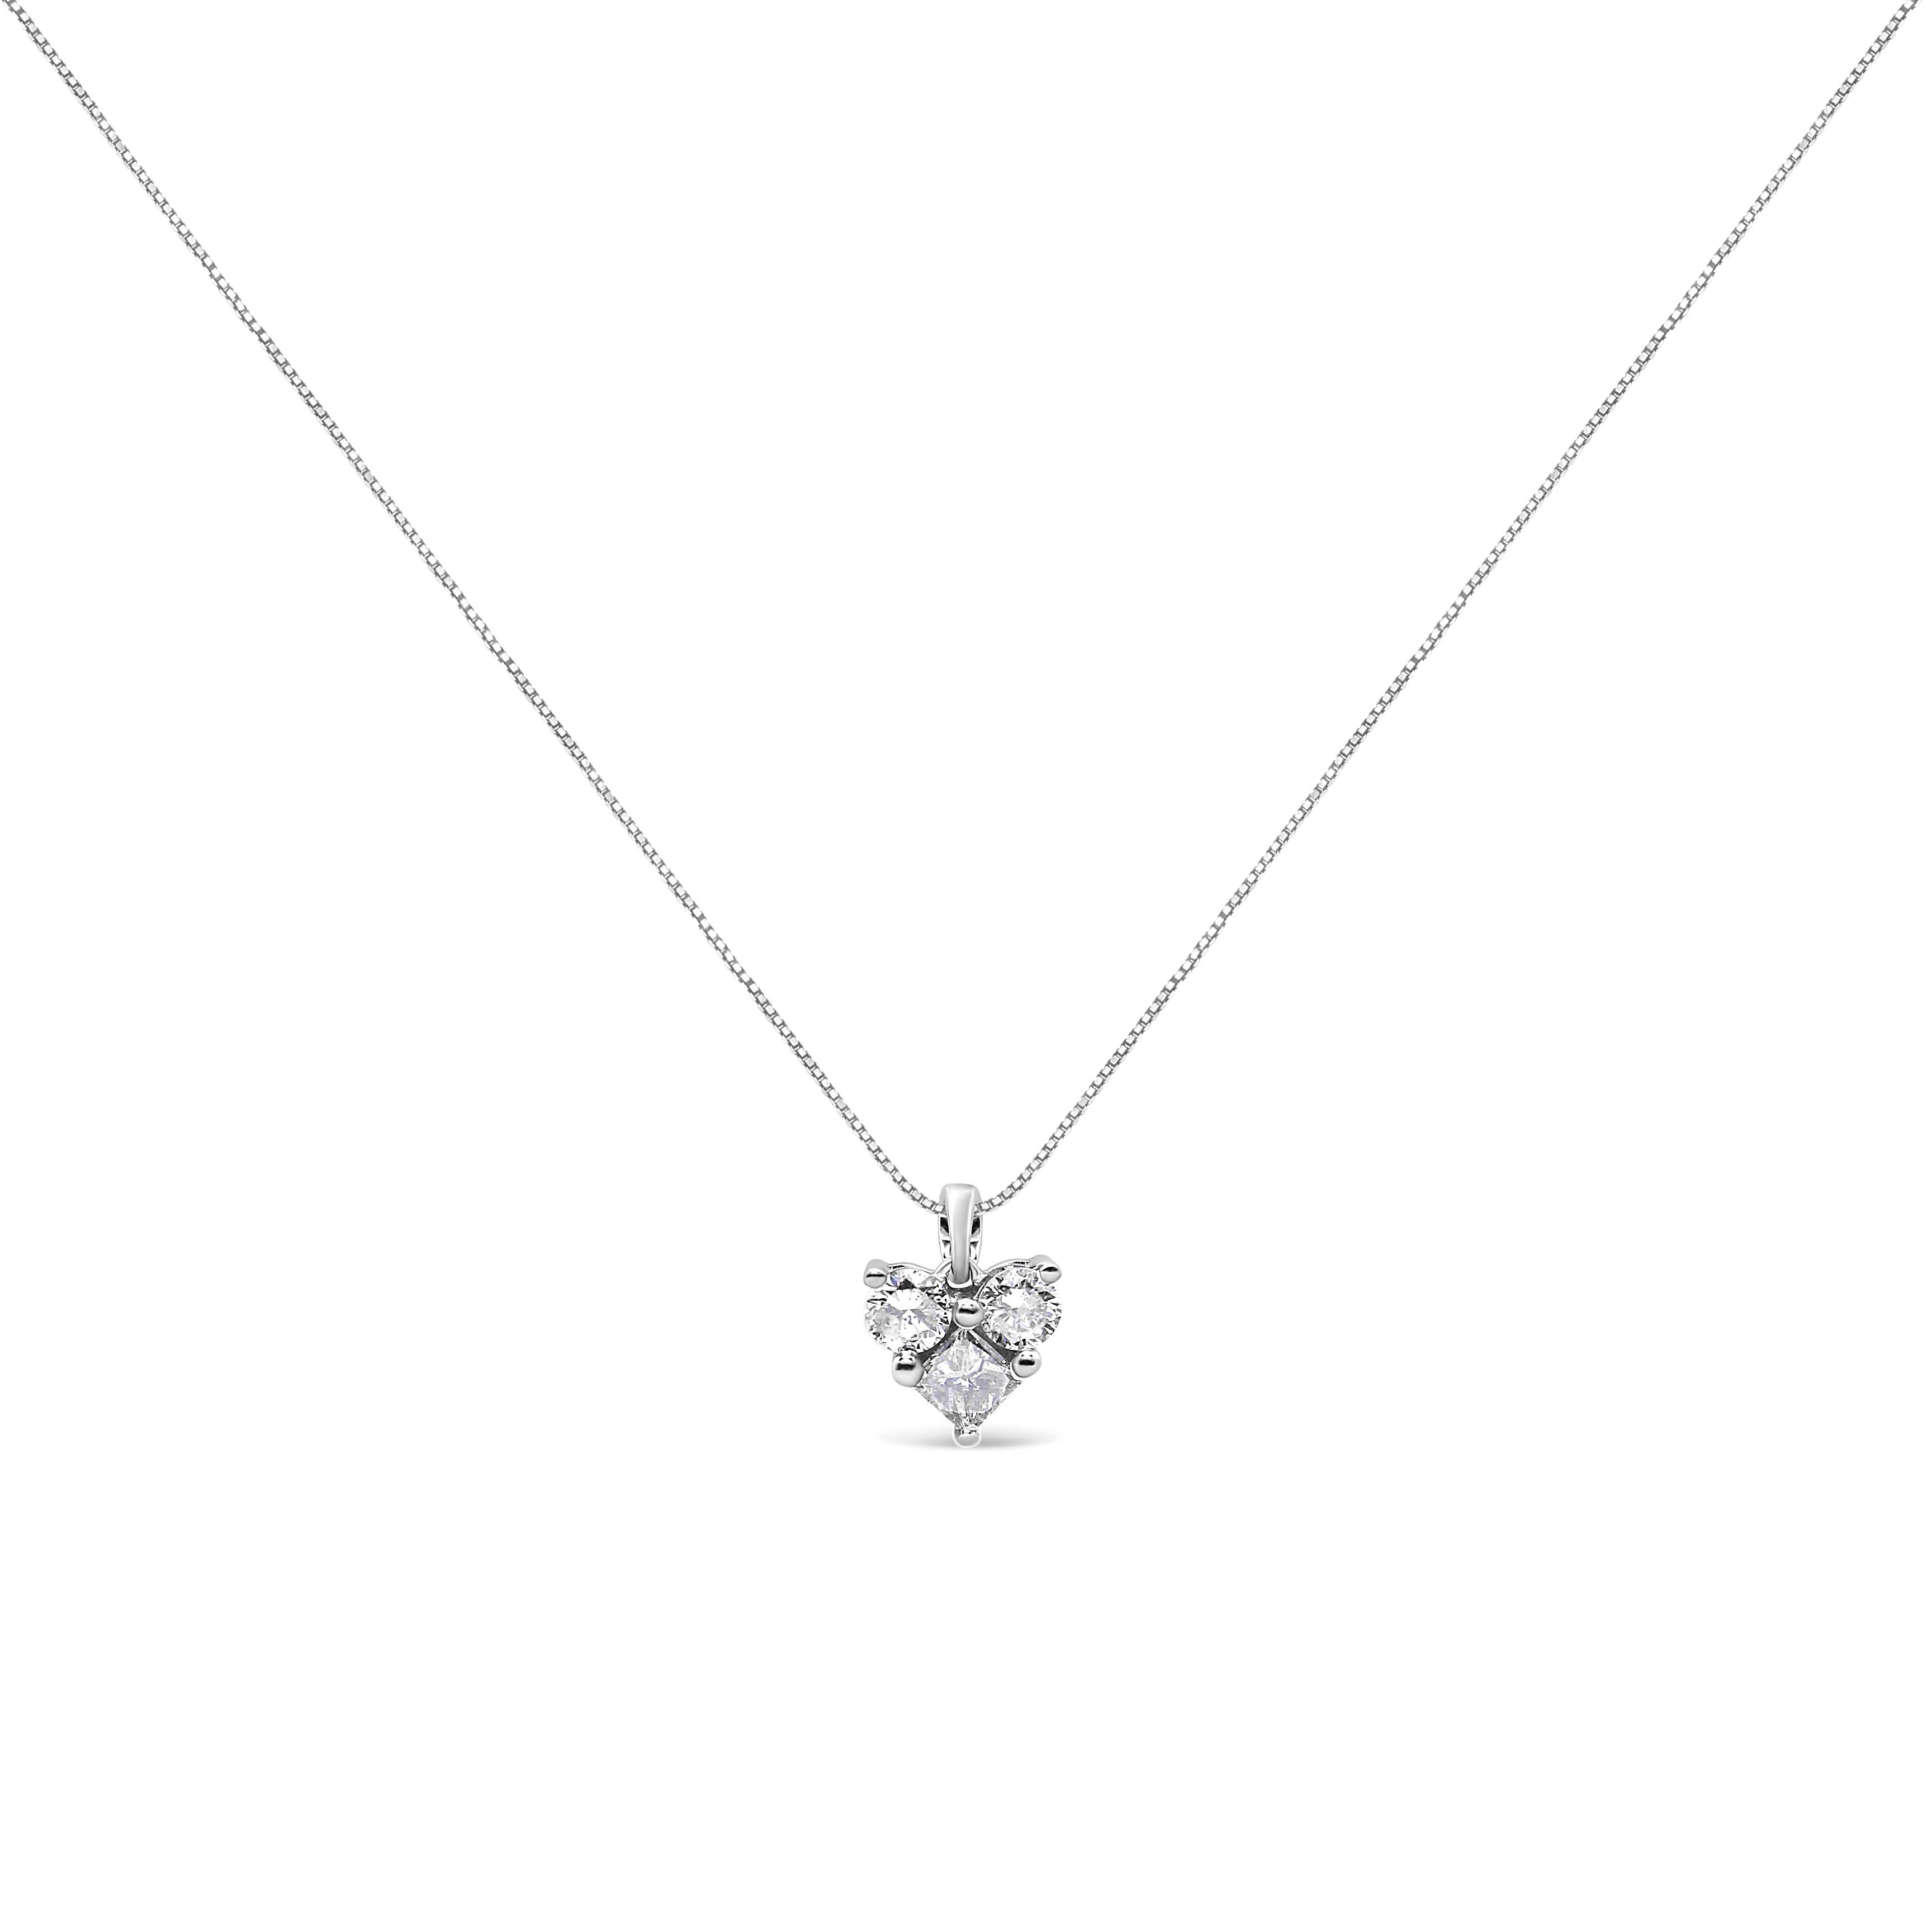 A meaningful symbol of love, this diamond heart pendant brings extraordinary sparkle with three sensational diamonds. One princess cut diamond and two round shaped diamonds come together to create the illusion of a heart shape in a prong setting to